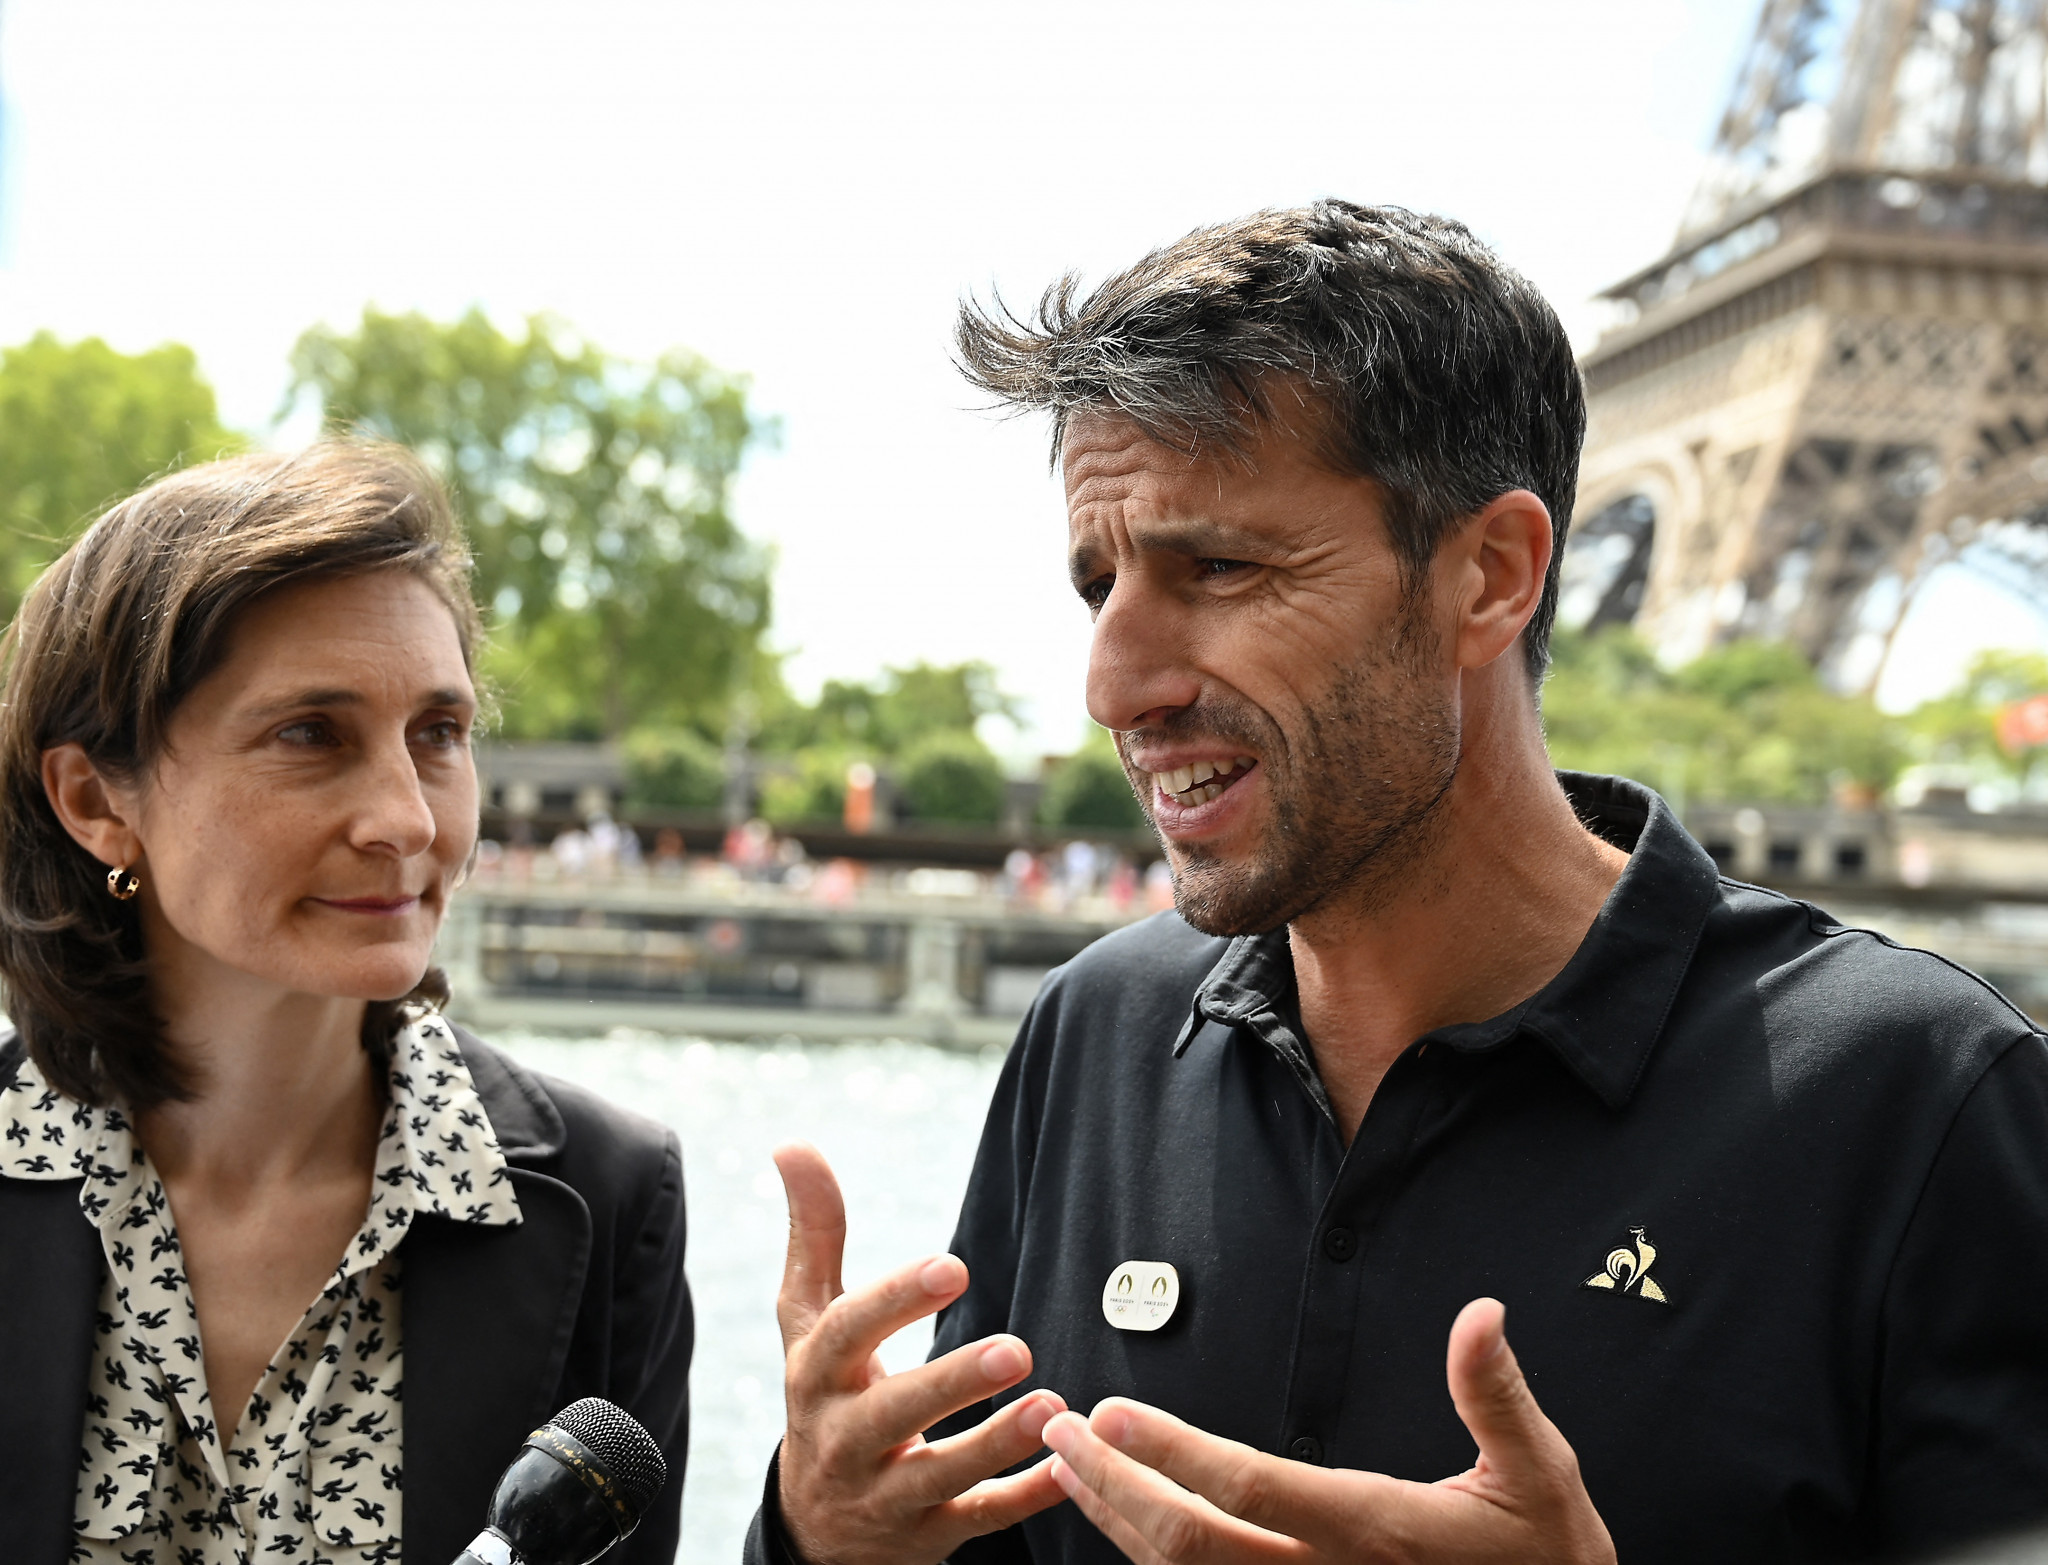 Paris 2024 President Tony Estanguet has recently insisted that the Games remain 